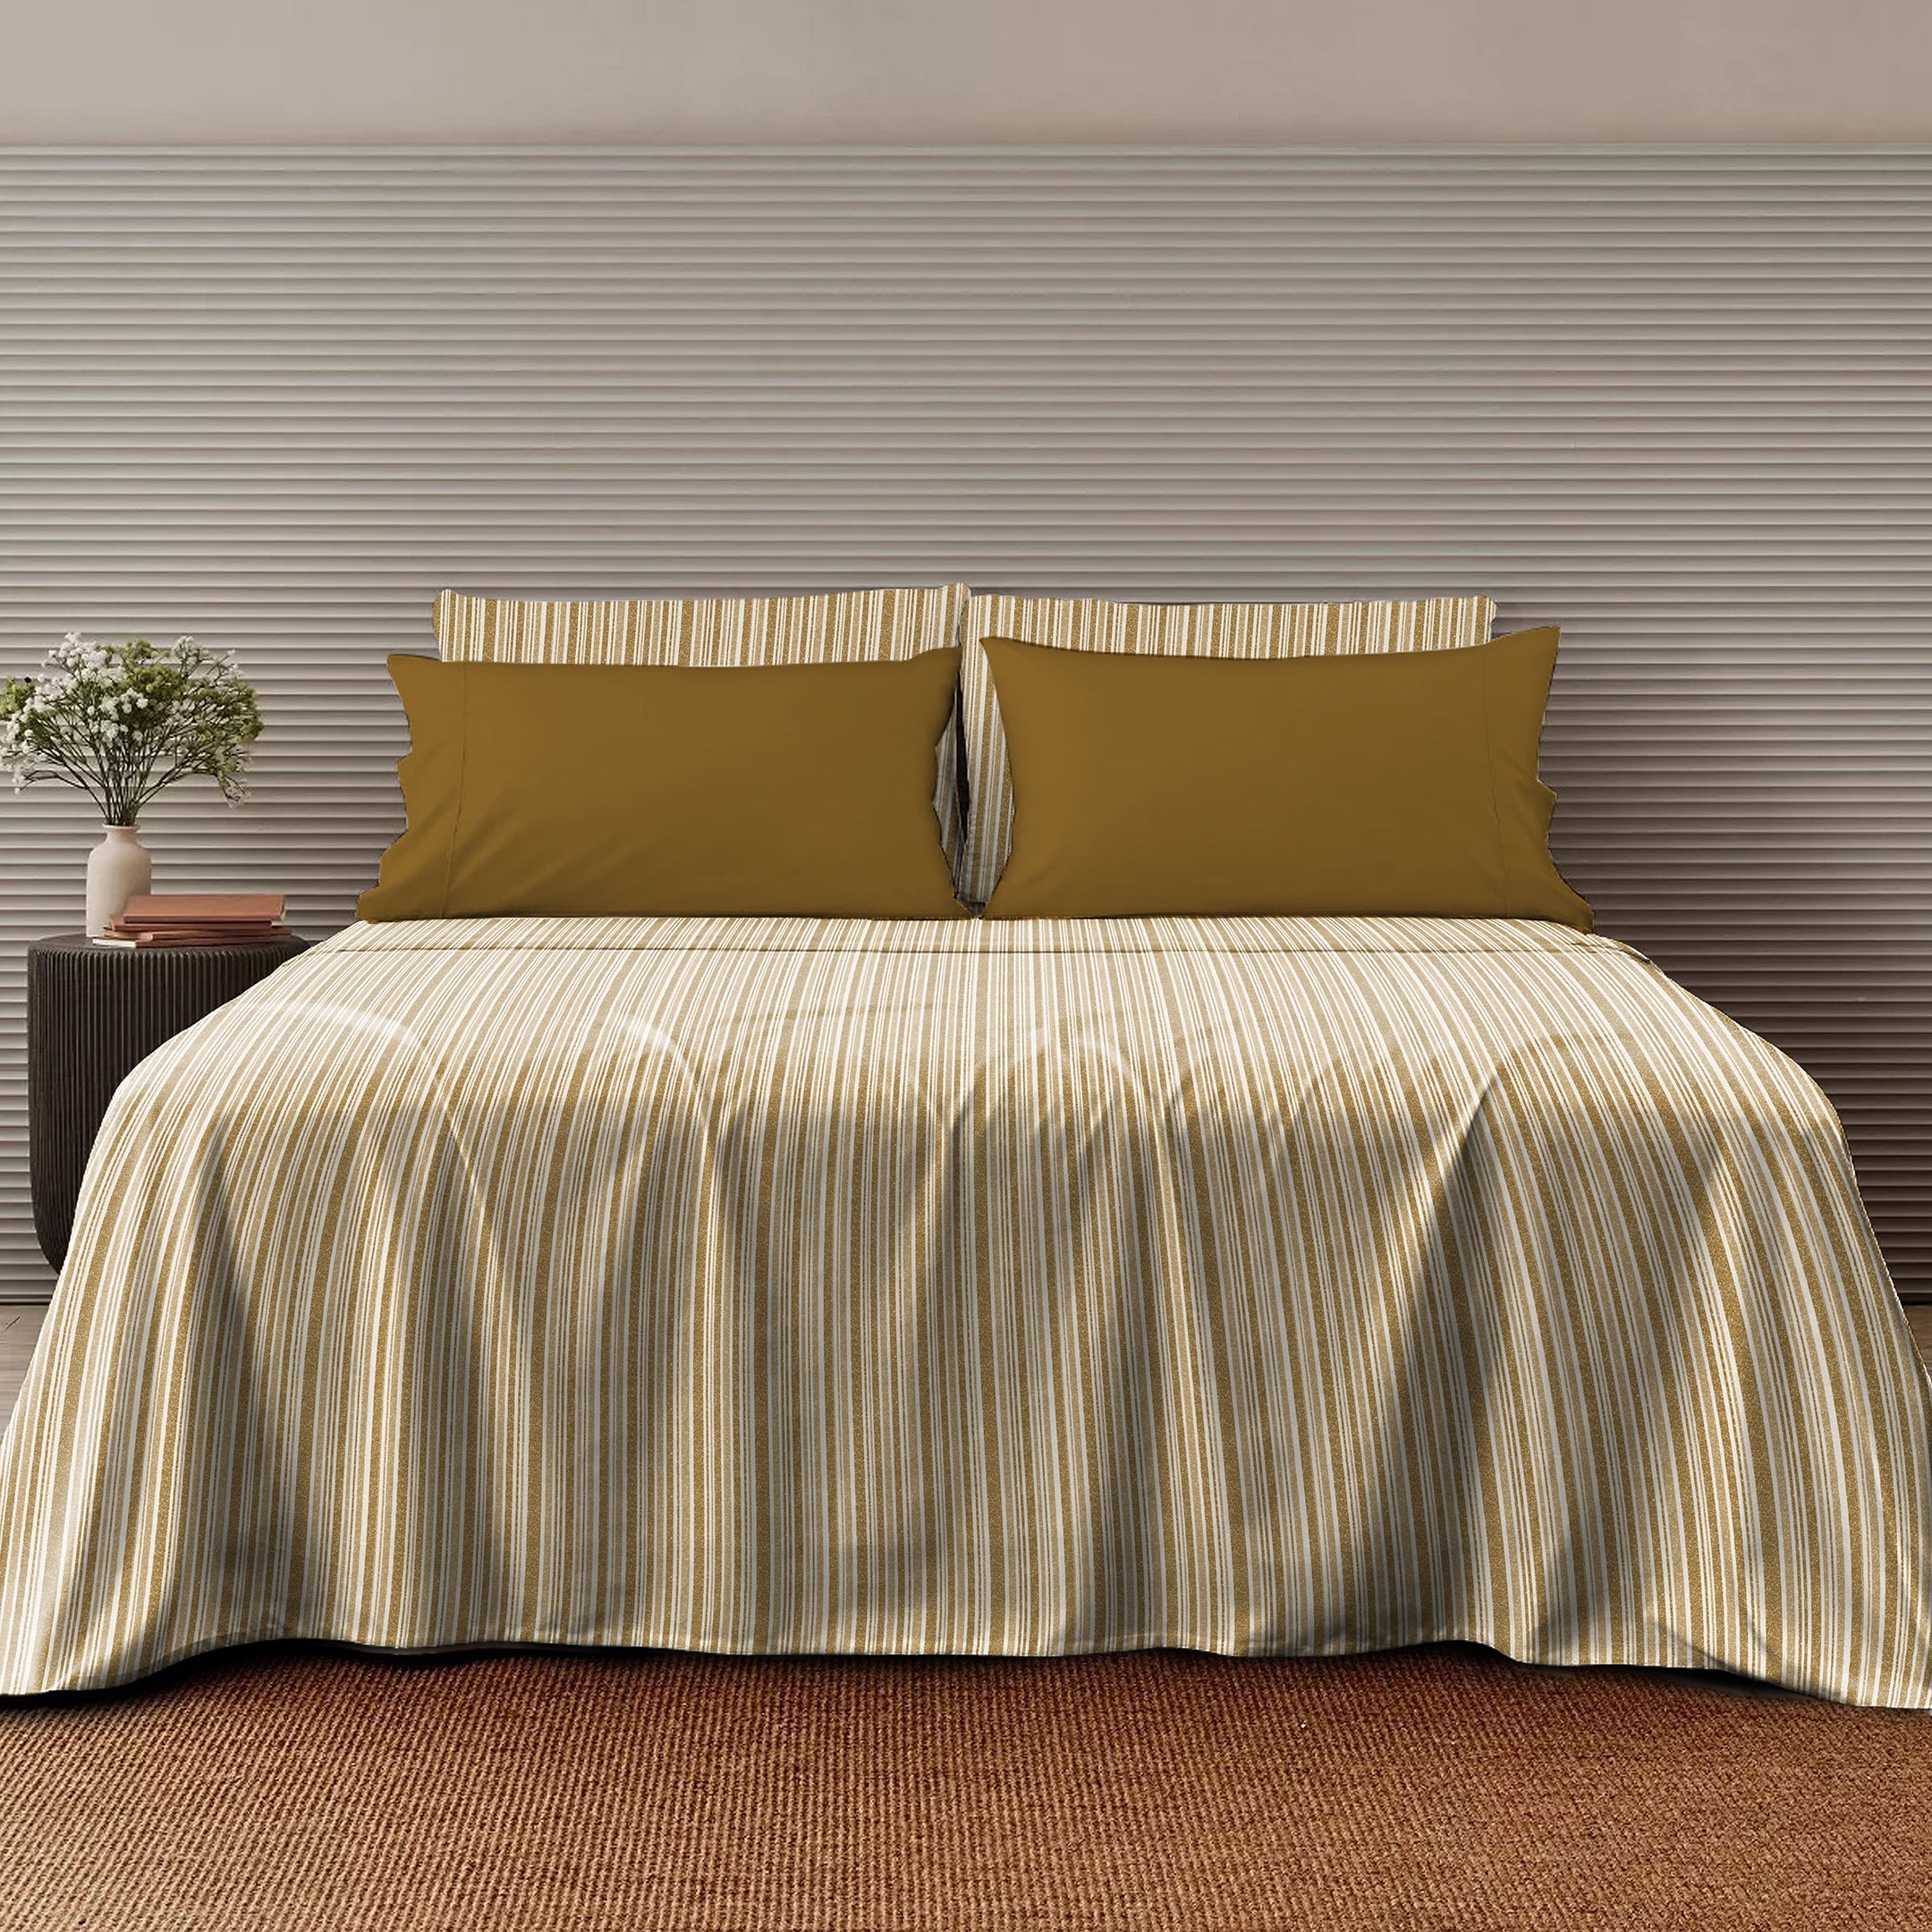 Jodhpur Stripe Bedsheet for Double Bed with 2 PillowCovers King Size (104" X 90") Camel